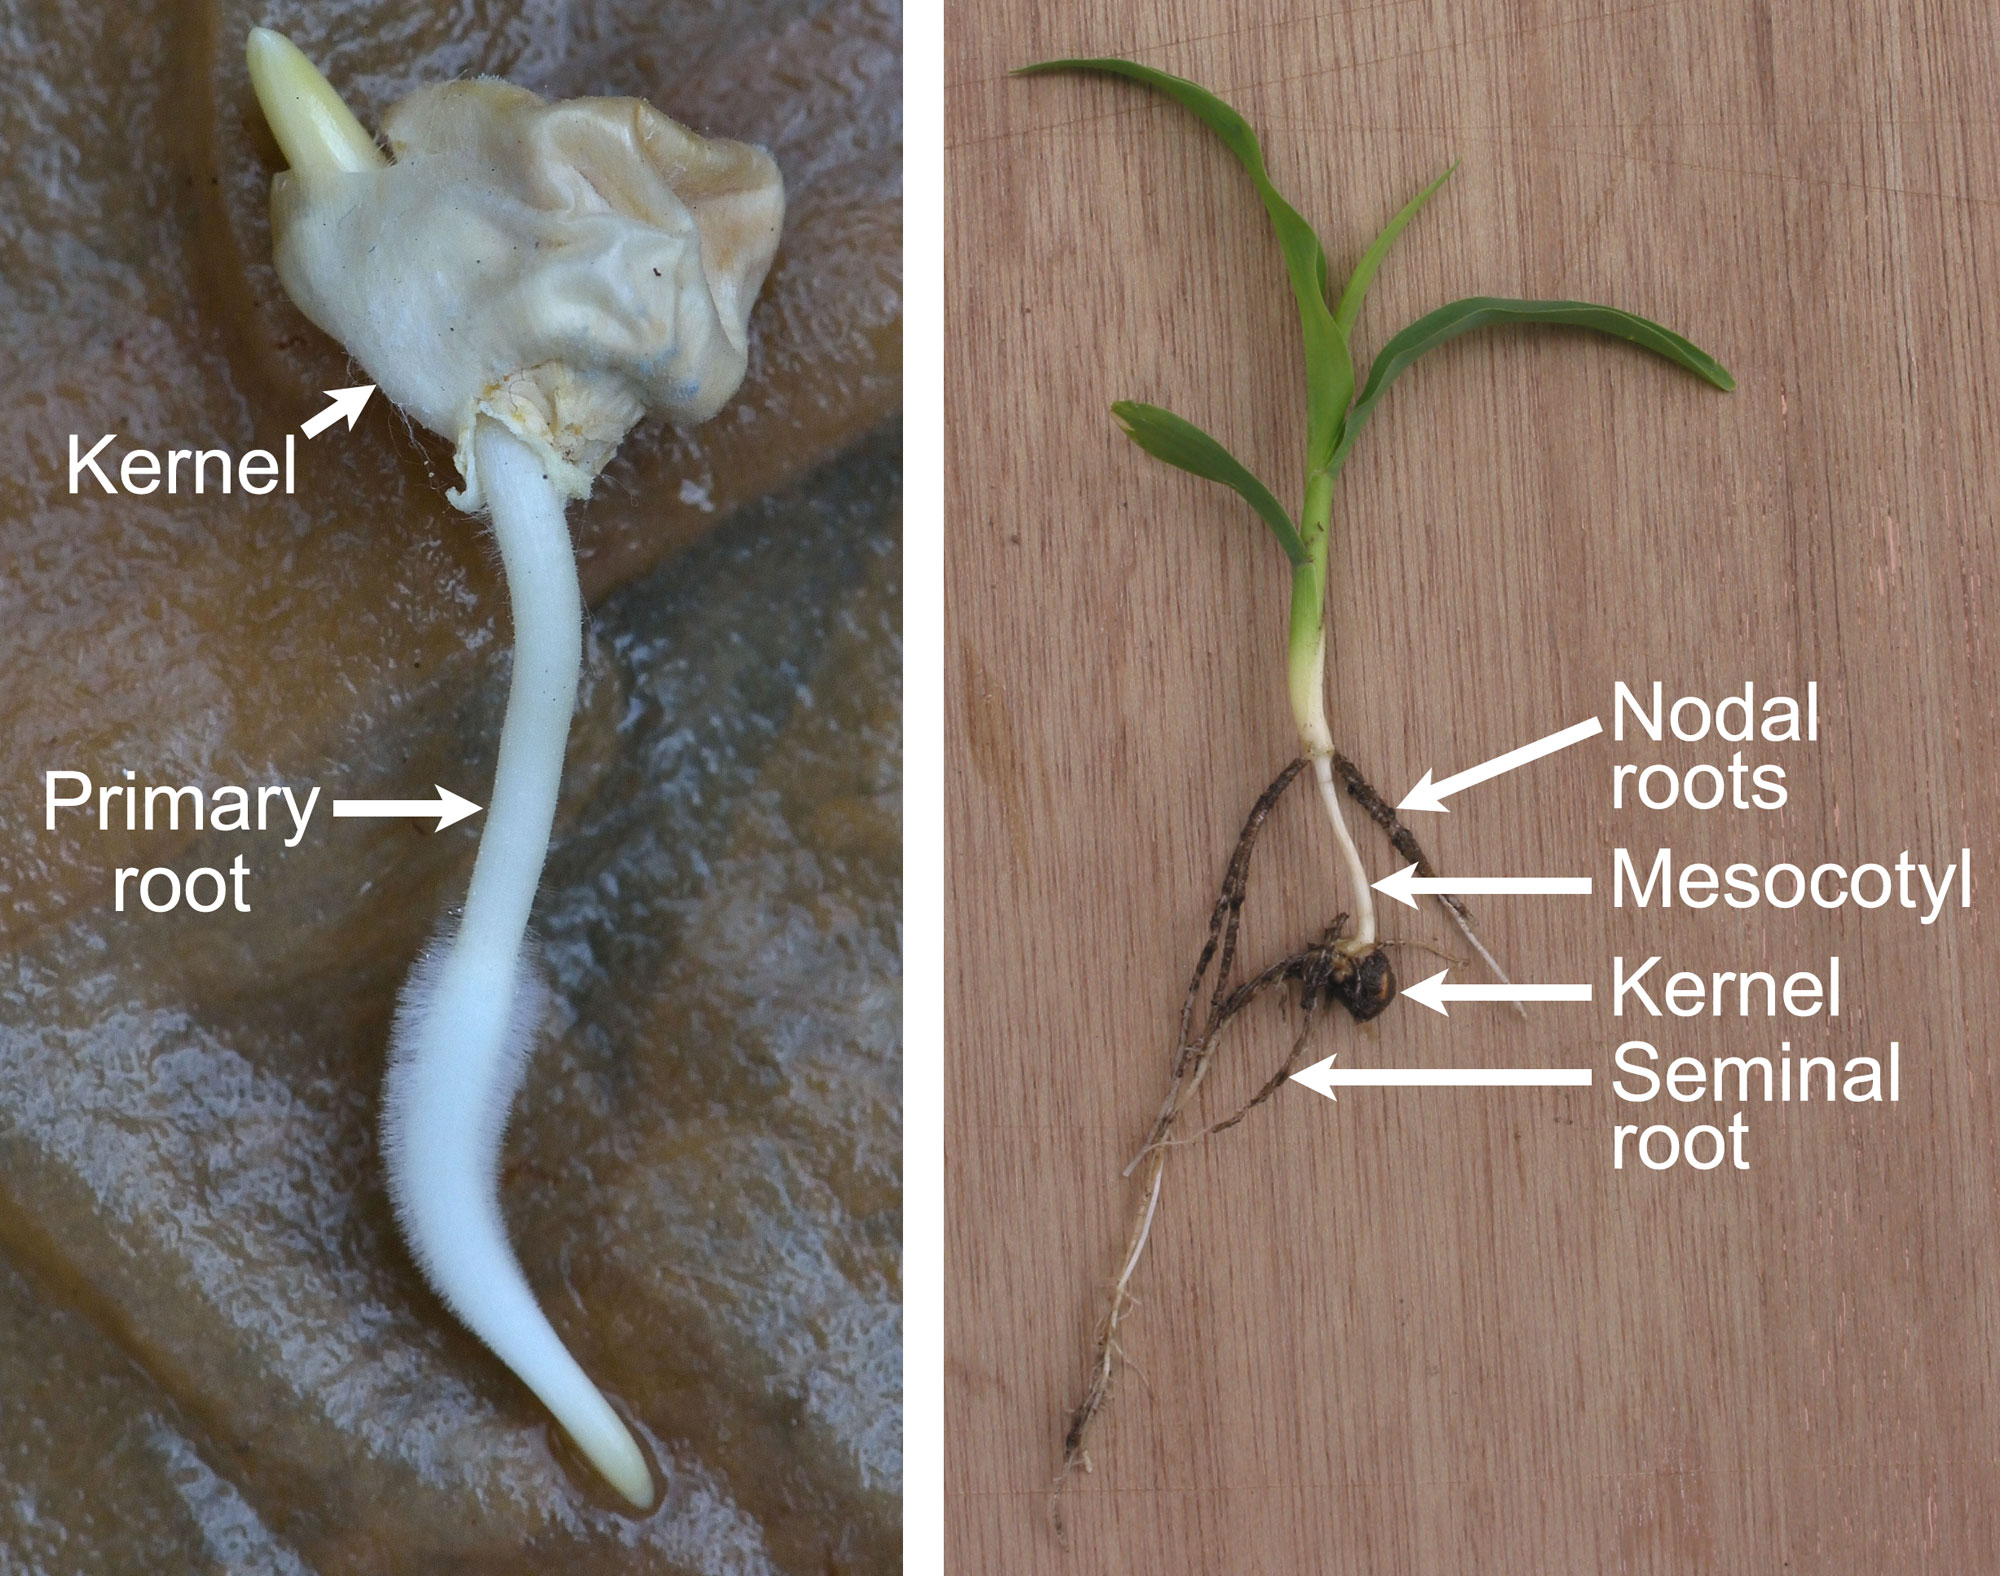 2-panel figure showing photographs of germinated maize kernels with young seedlings. Panel 1: Germinated kernel laying on its side on a wet paper towel. The kernel has a wrinkled surface. The primary root, which is white with root hairs near the tip, is protruding from the base of the kernel. The tip of the coleoptile is protruding from the upper surface of the kernel. Panel 2: Germinated kernel laying on its side on a piece of wood. The photo shows a green seedling atop an extended mesocotyl, which looks like a thin white stem. A series of nodal roots grows out of the base of the stem of the green seedling, above the mesocotyl. The kernel occurs at the base of the mesocotyl. Seminal roots and a probable primary root grow out of the kernel.